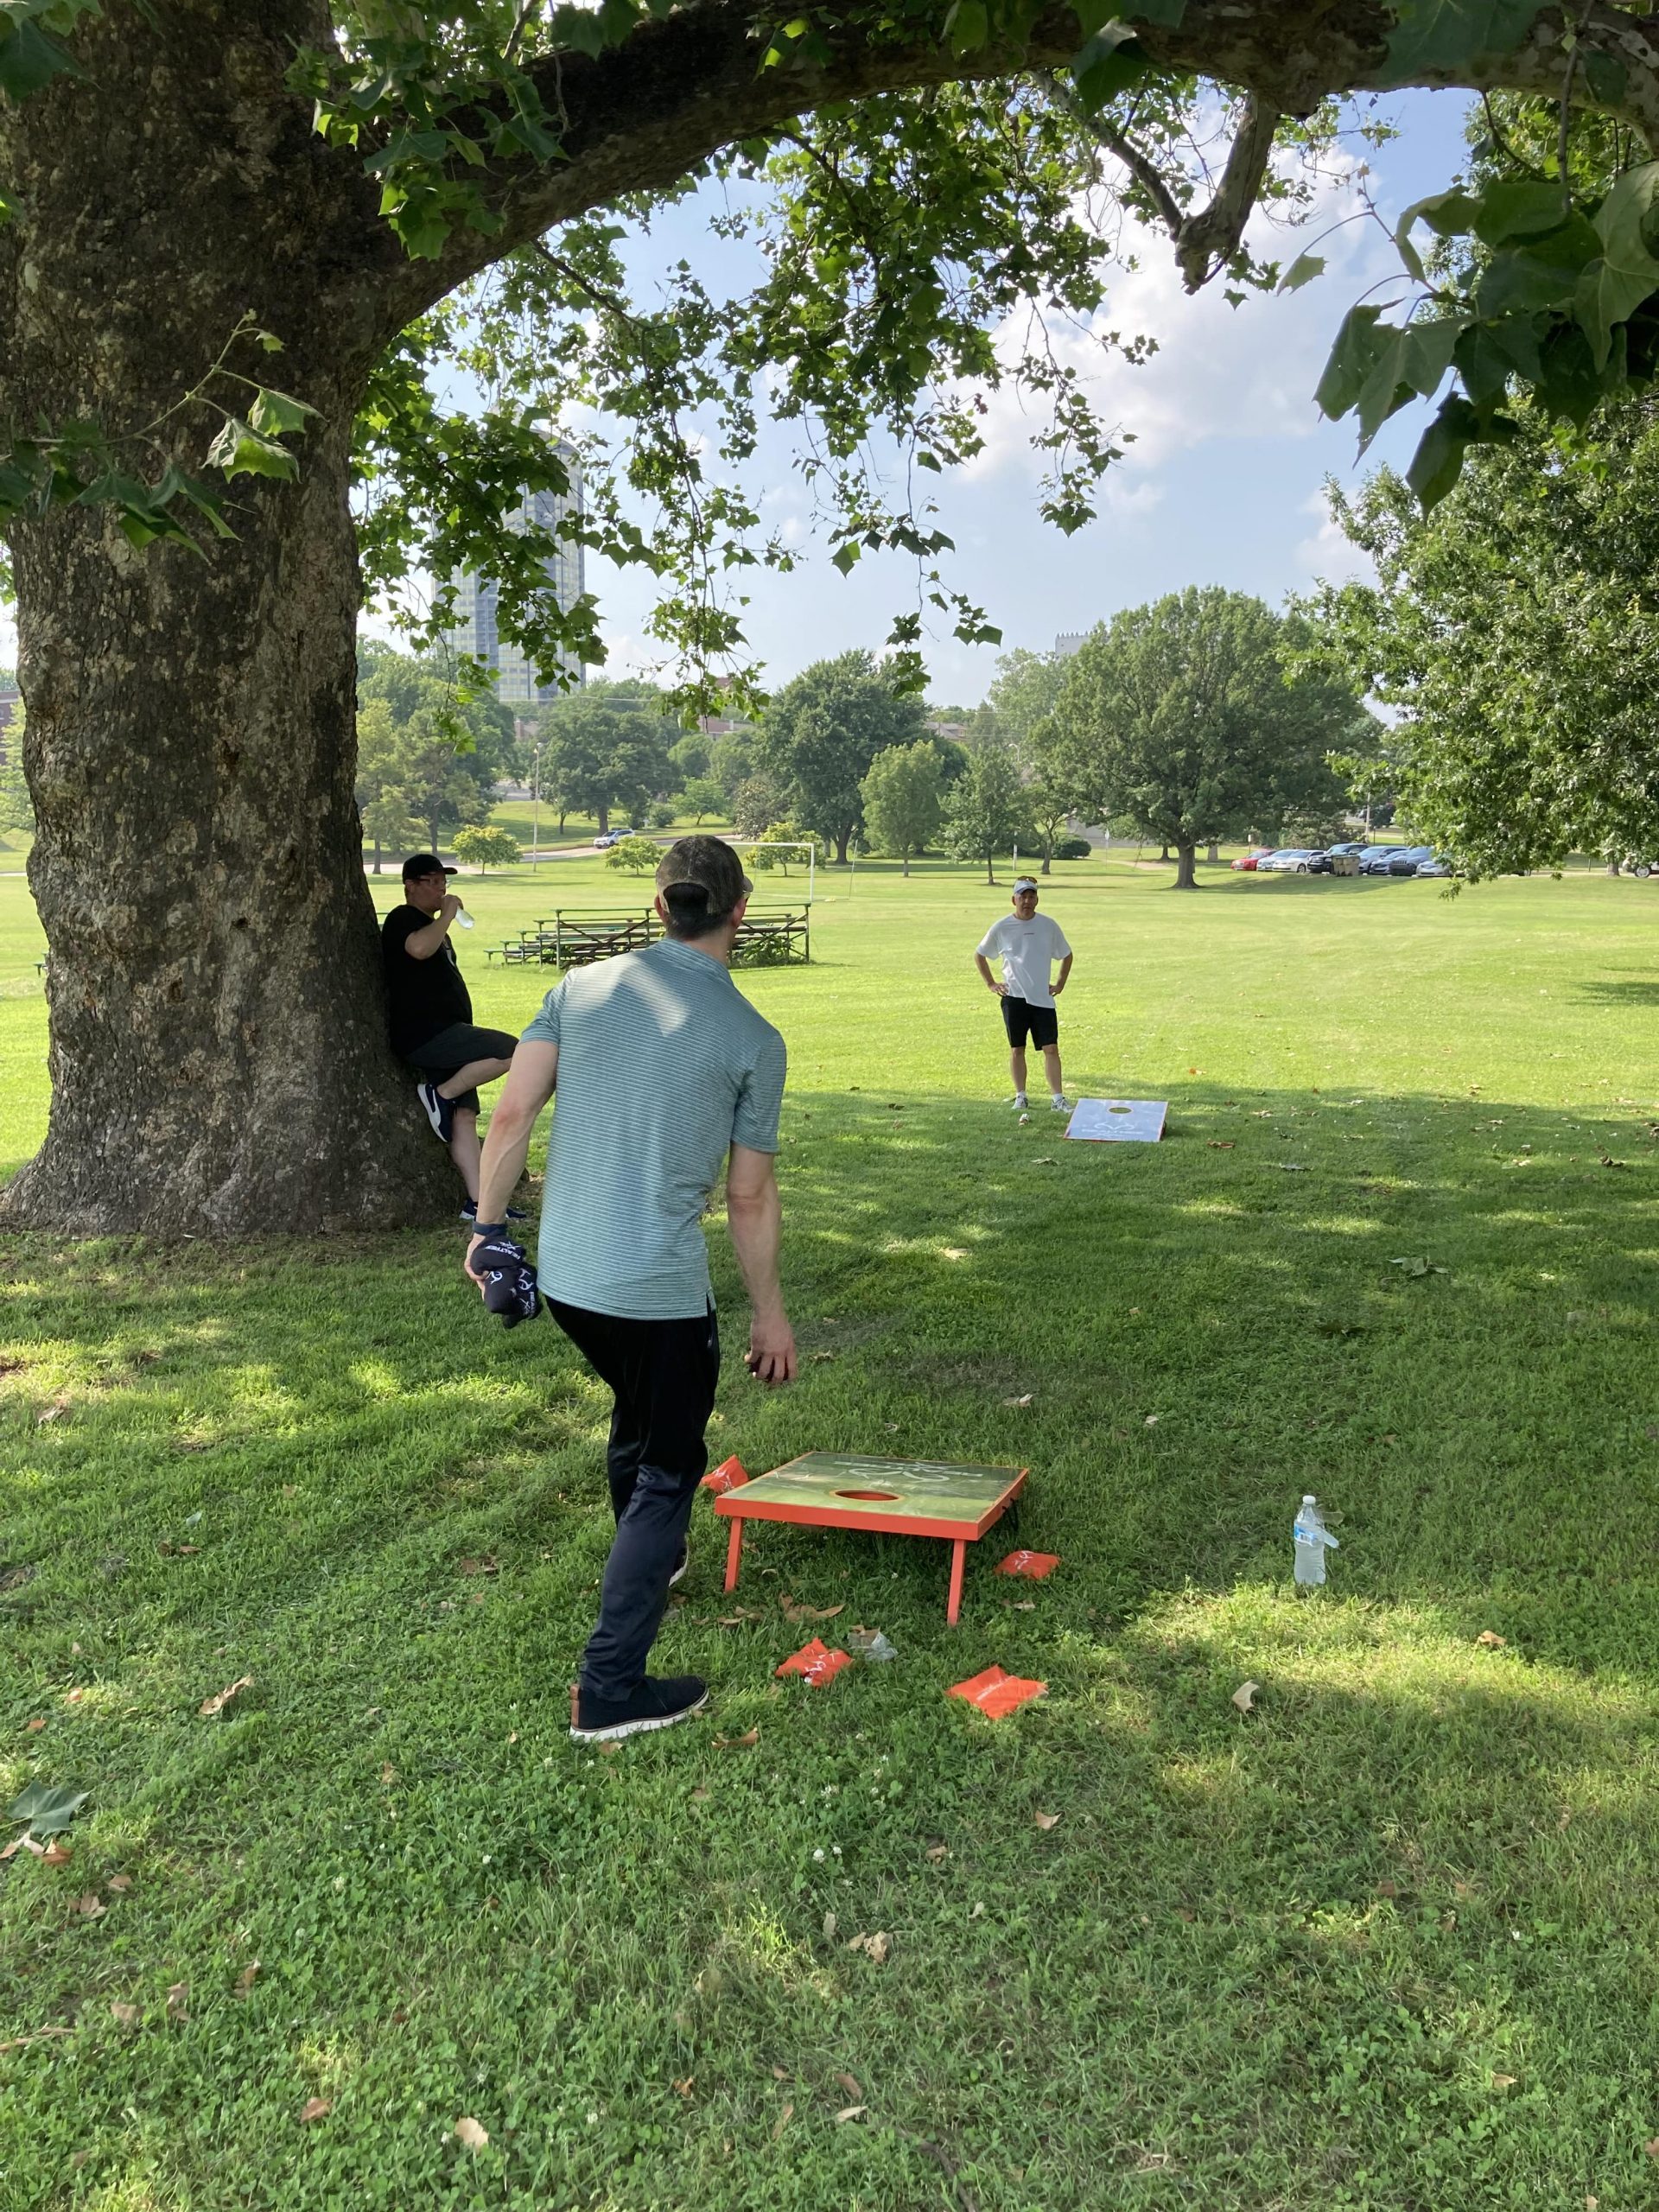 Two men playing a game at a park.